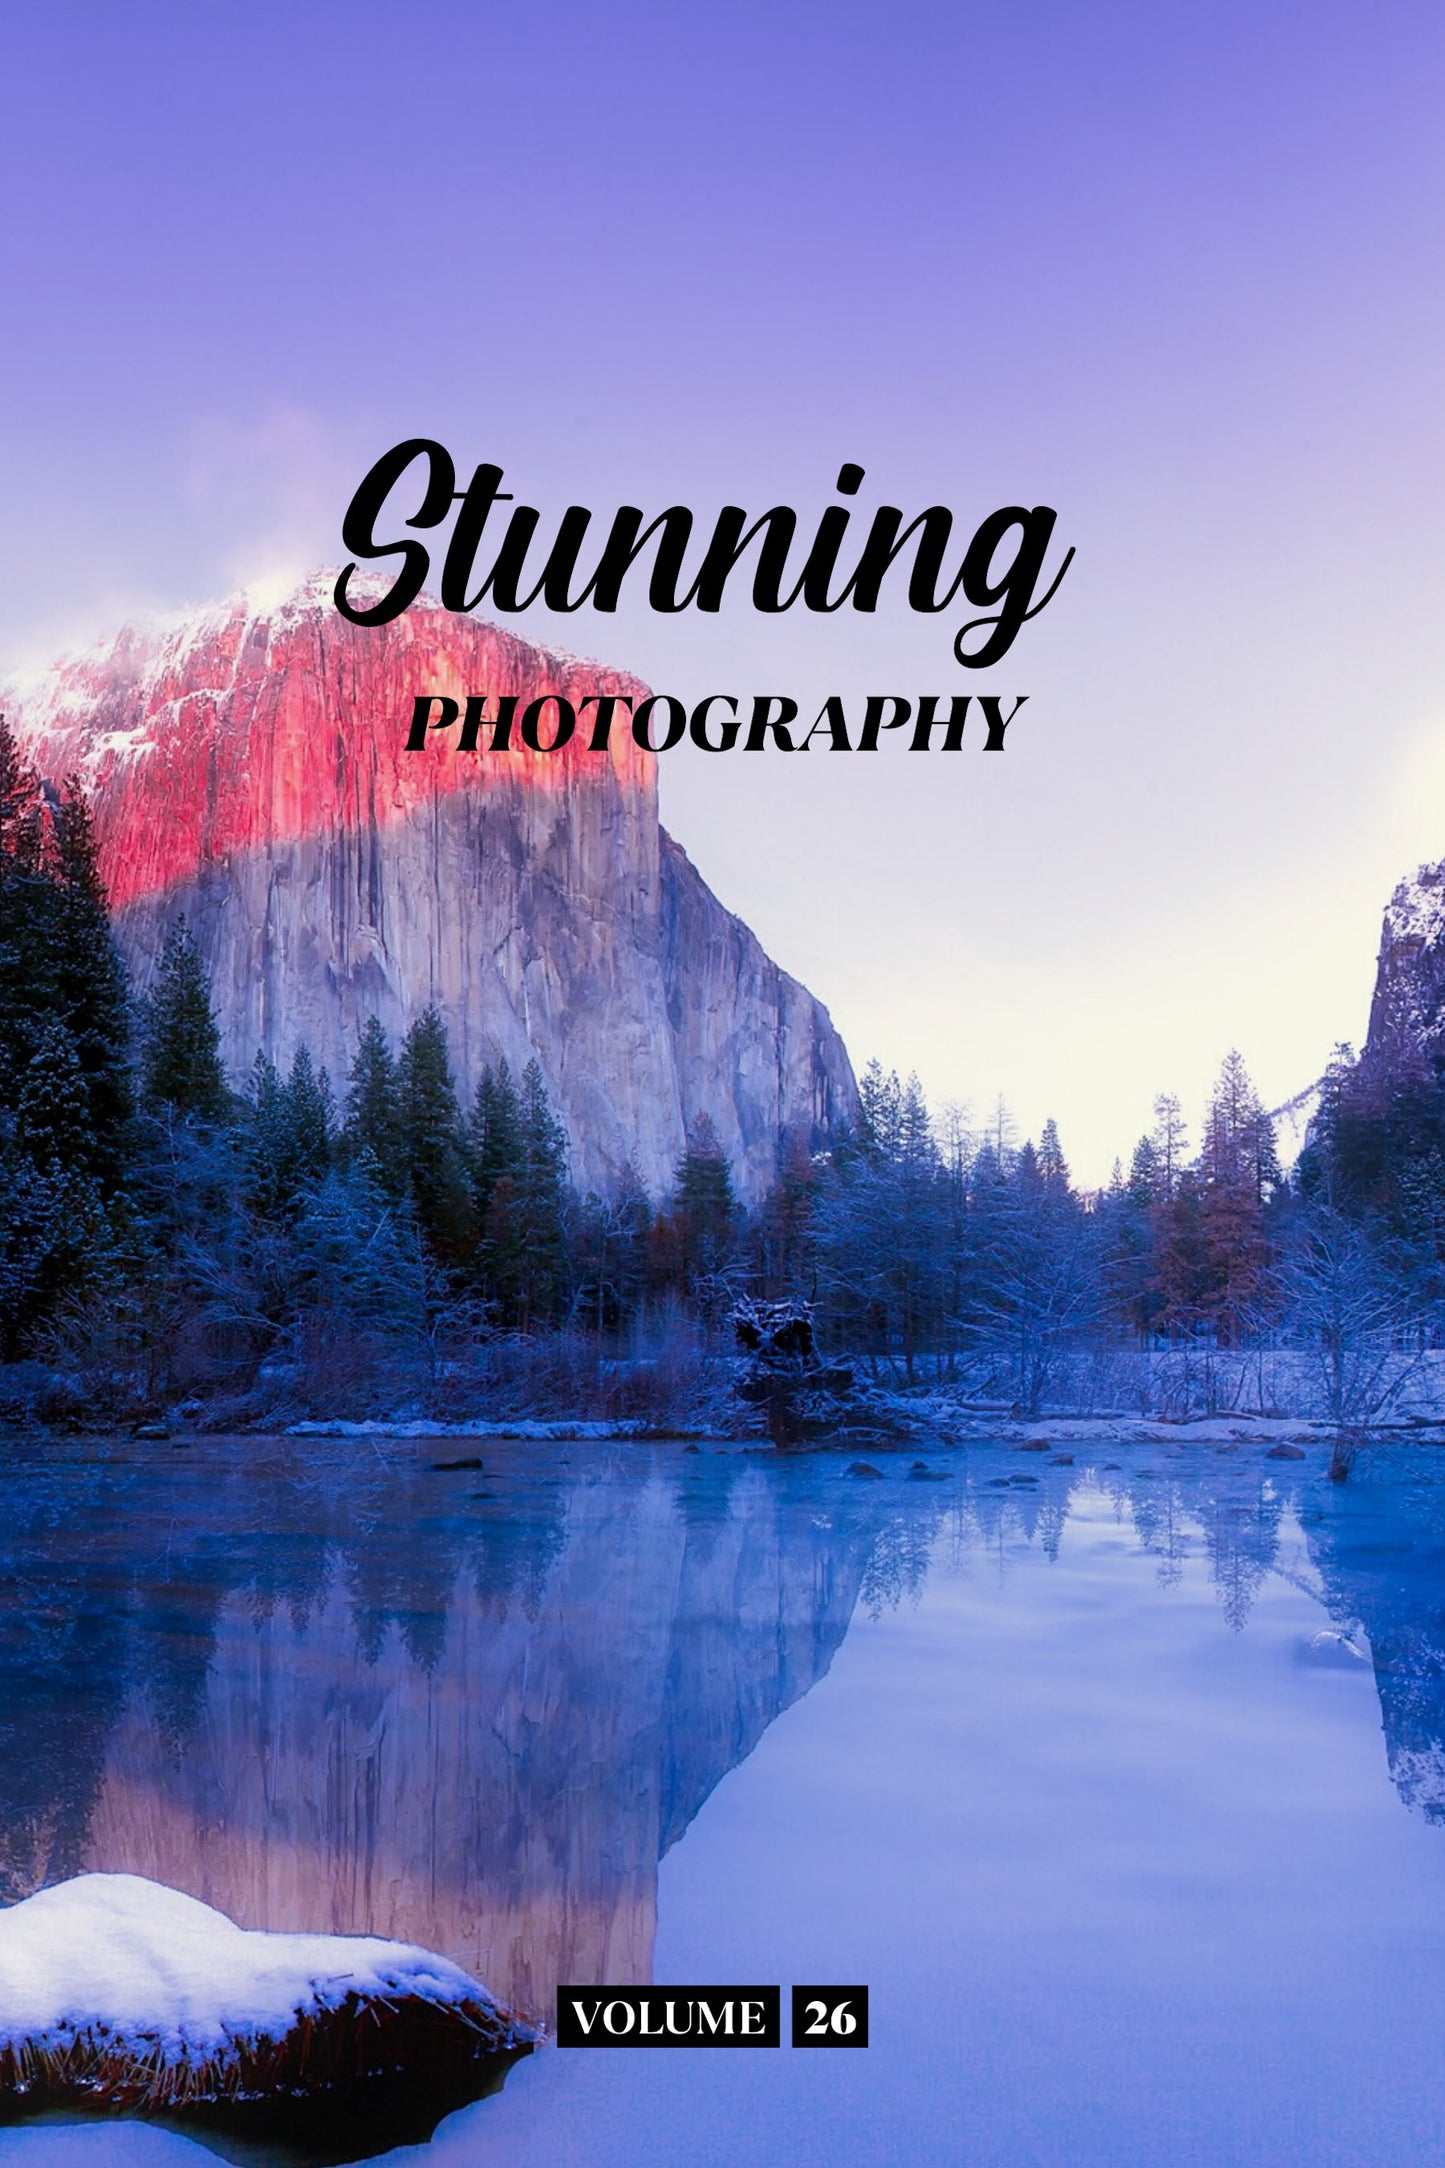 Stunning Photography Volume 26 (Physical Book Pre-Order)